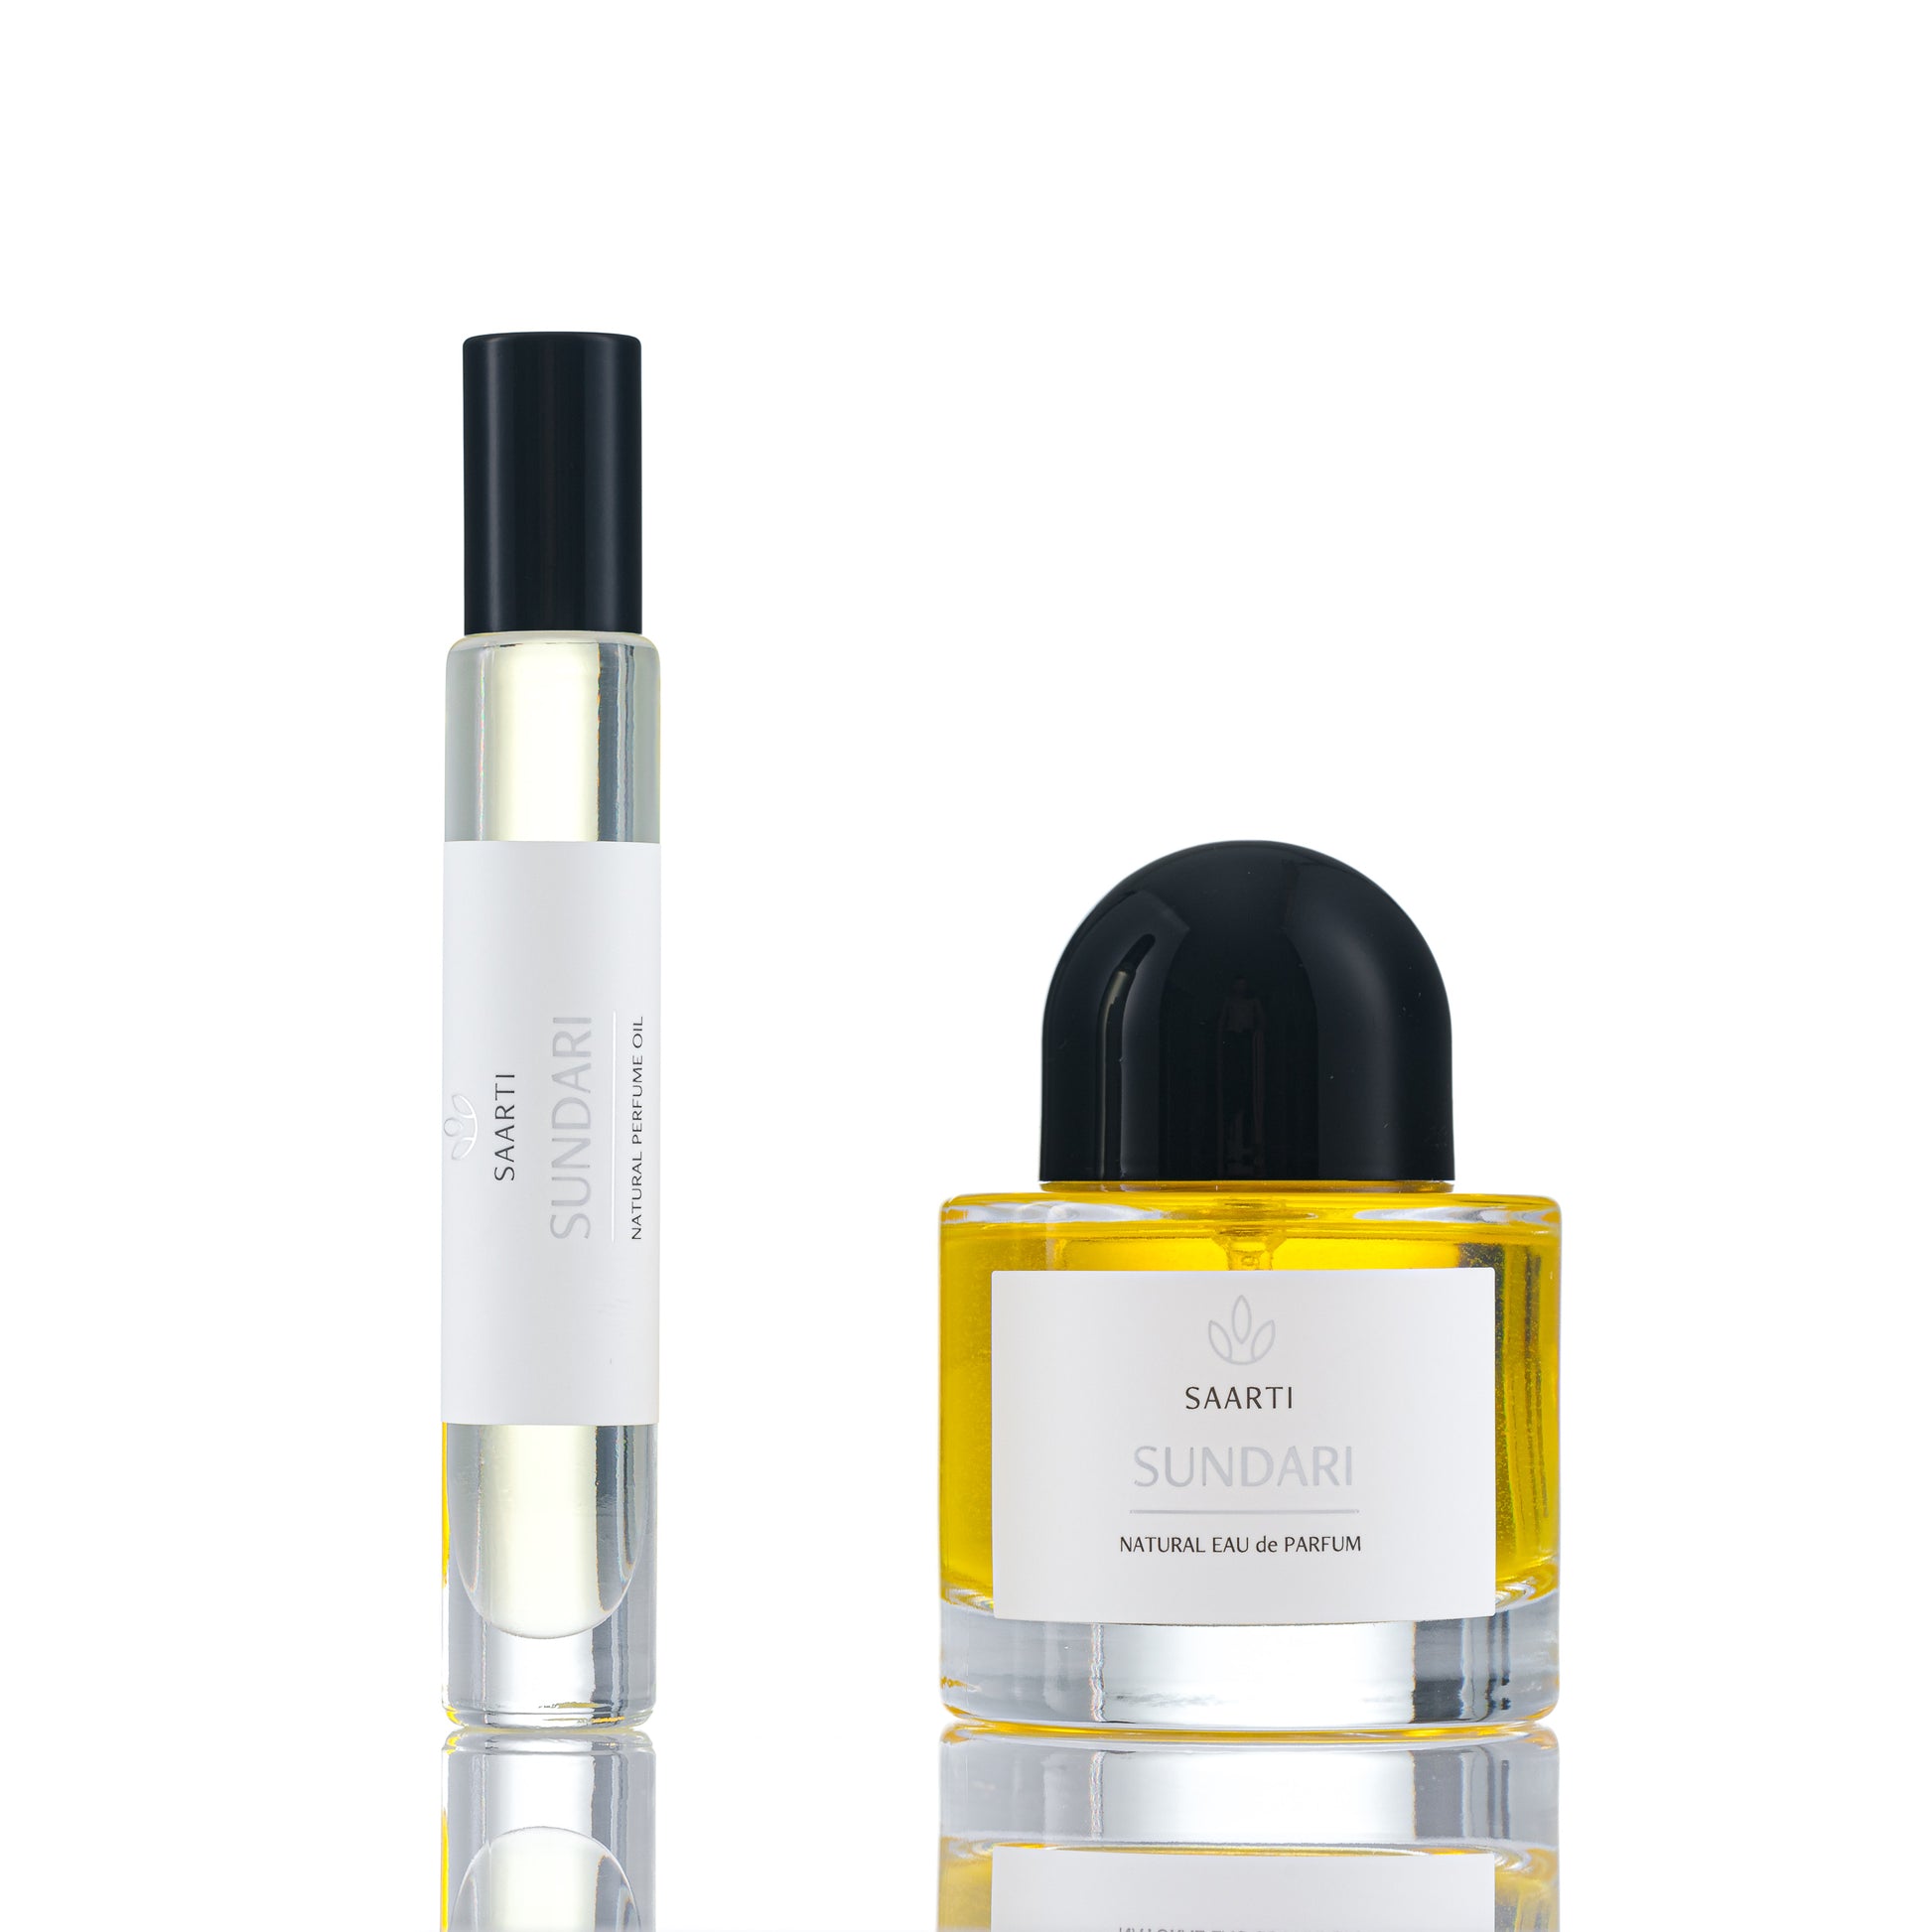 pure perfume options with jasmine and neroli essential oils made in cambodia and australia